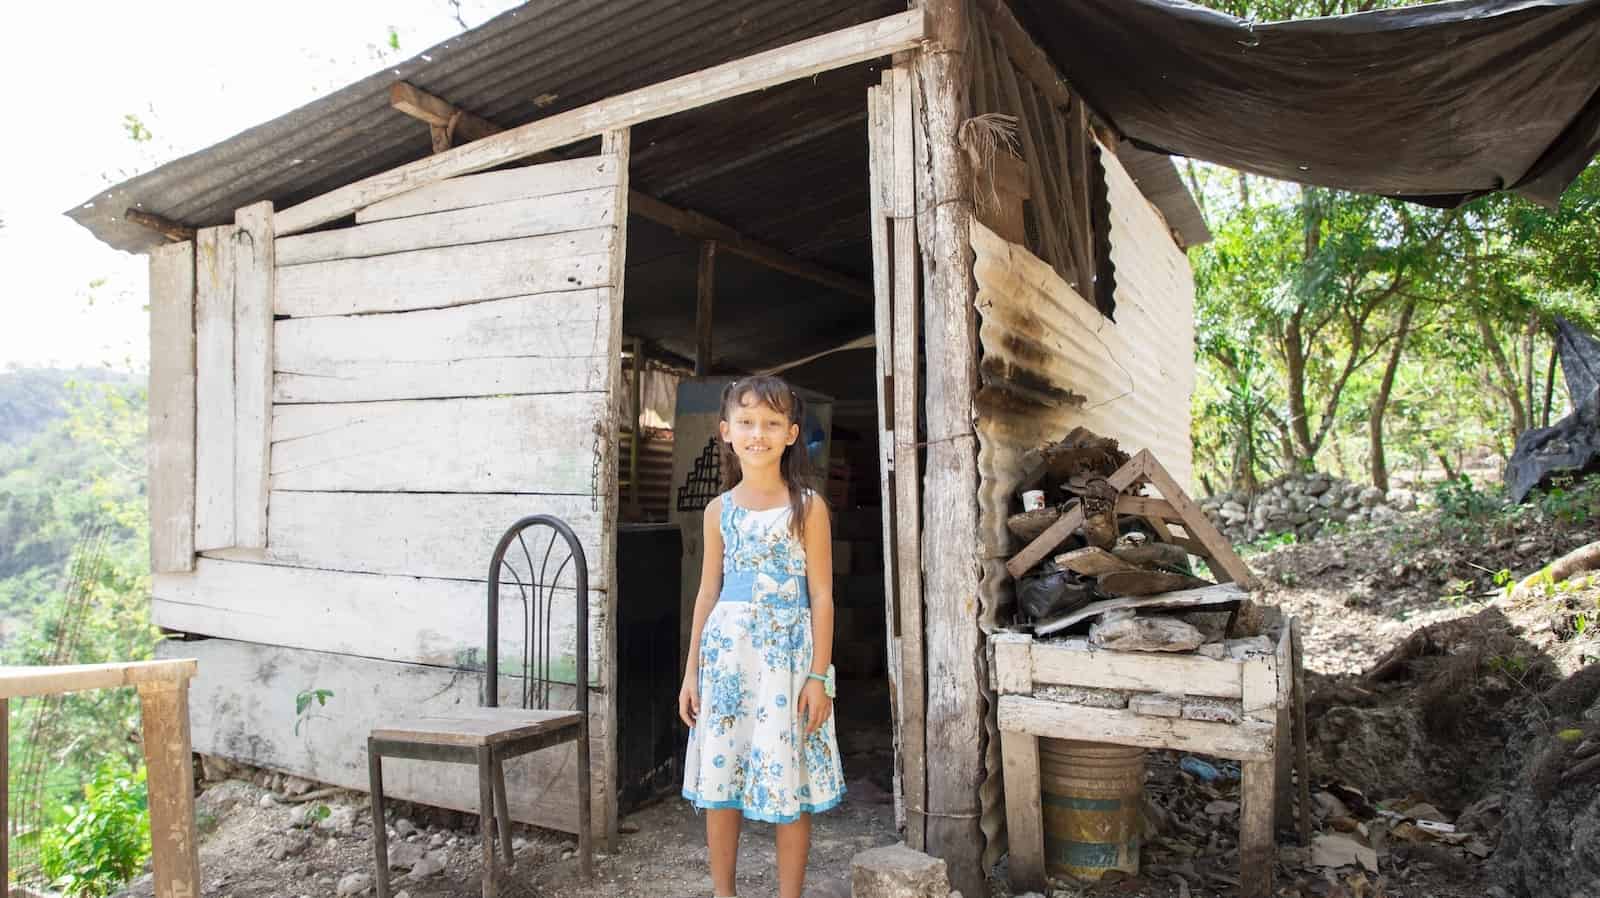 A girl in a white and blue dress stands in front of a small home in Central America made from wood and metal sheets. In the background are green hills and tress.